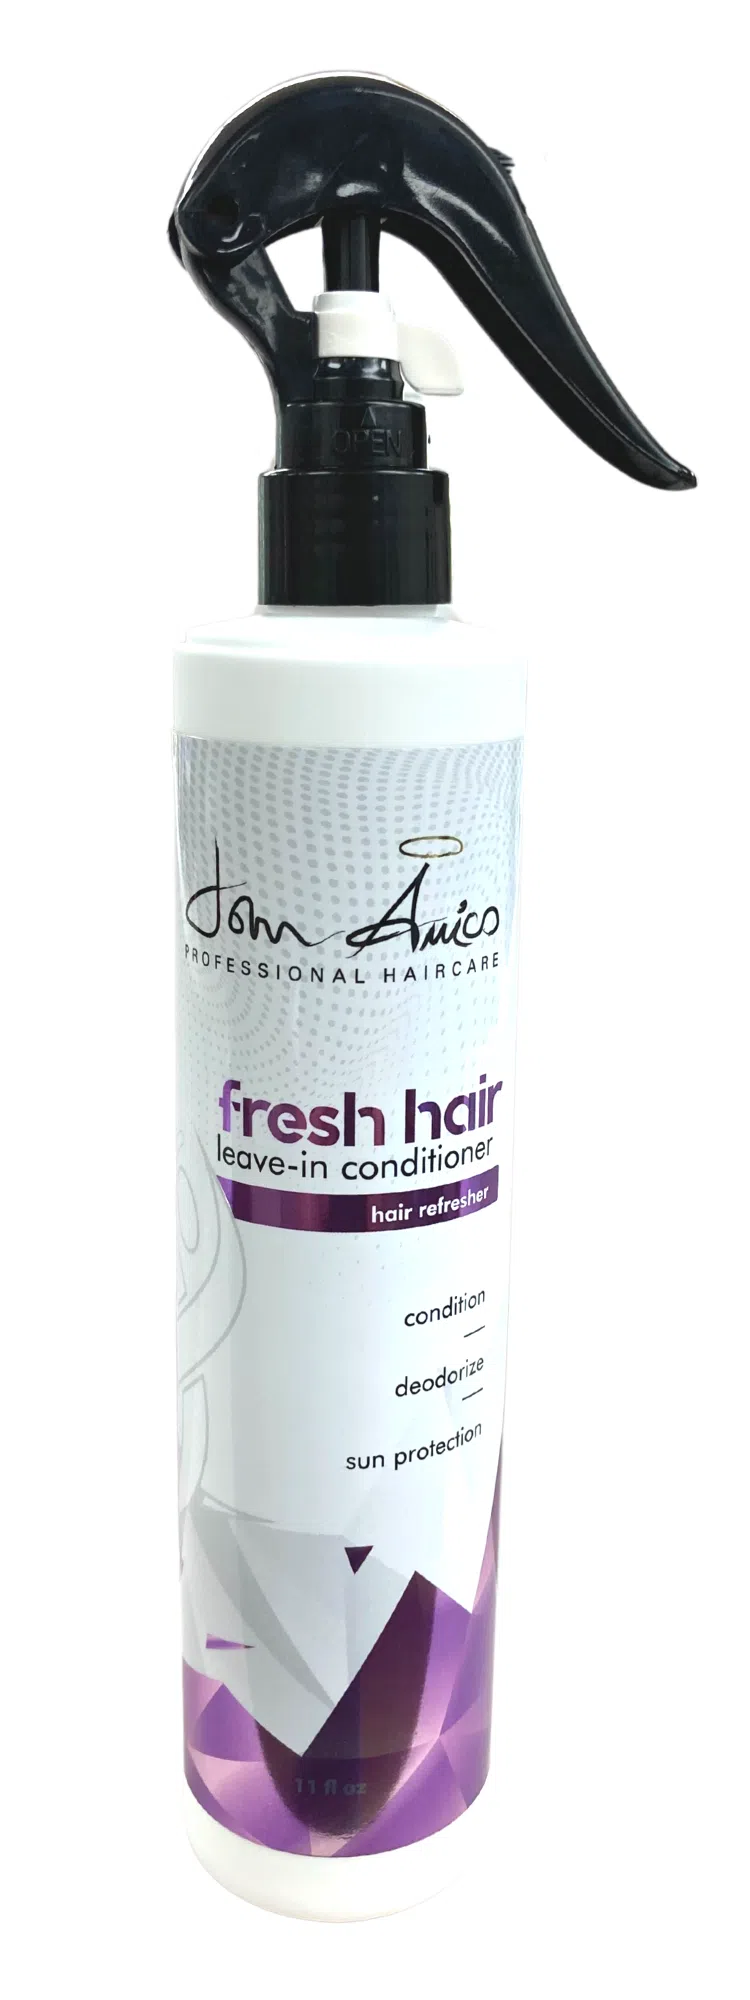 FRESH HAIR LEAVE IN CONDITIONER | Professional Stylist Salon Grade Products  - John Amico